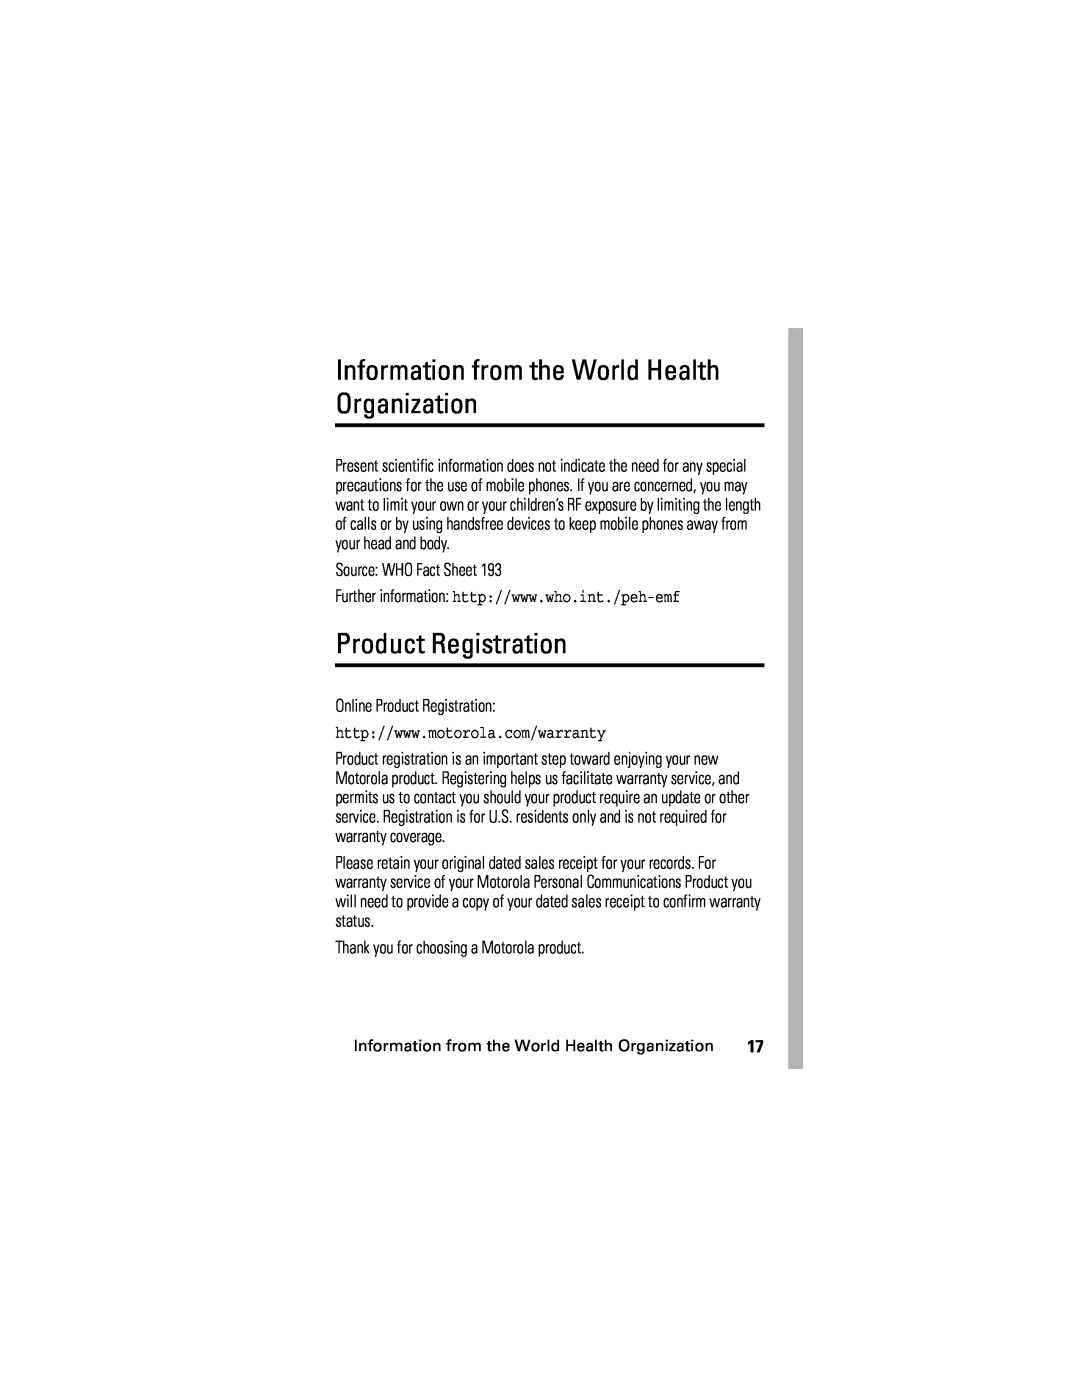 Motorola V635 manual Information from the World Health Organization, Product Registration, Source WHO Fact Sheet 